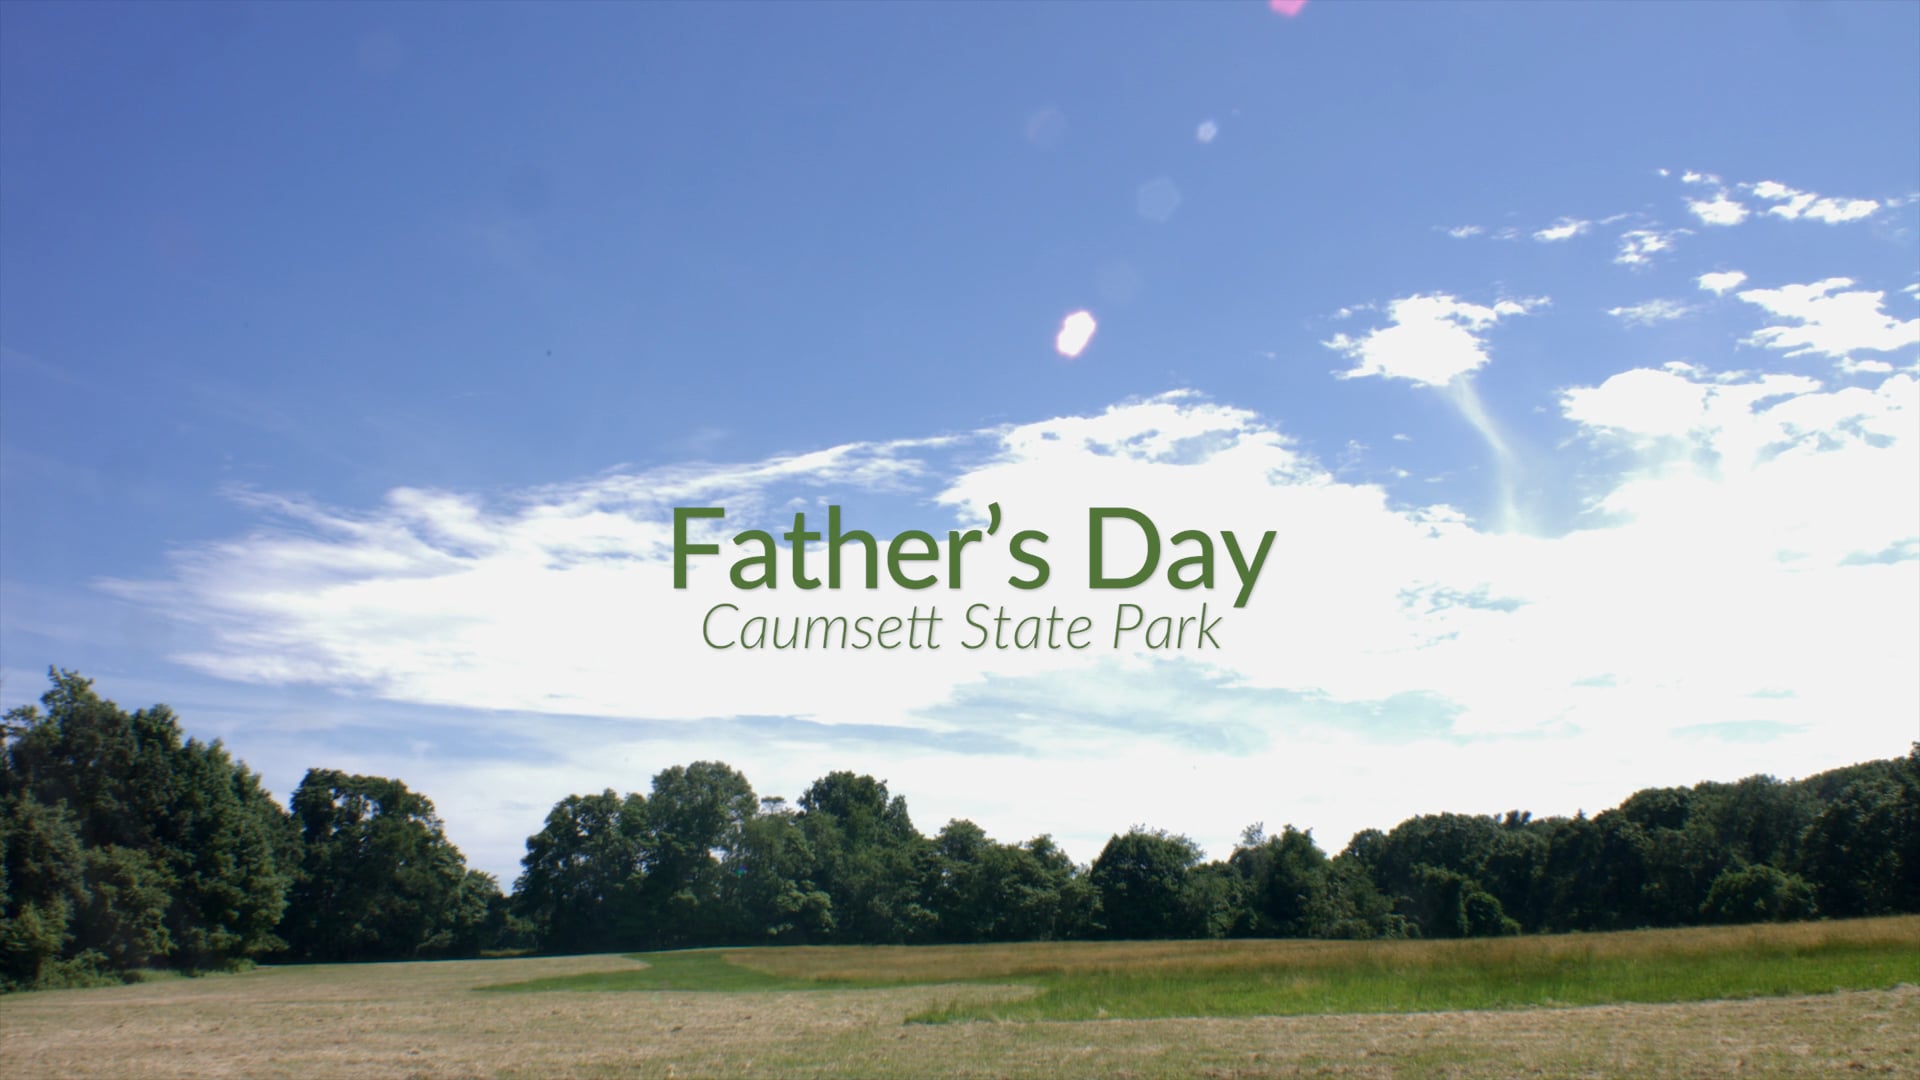 Father's Day at Caumsett